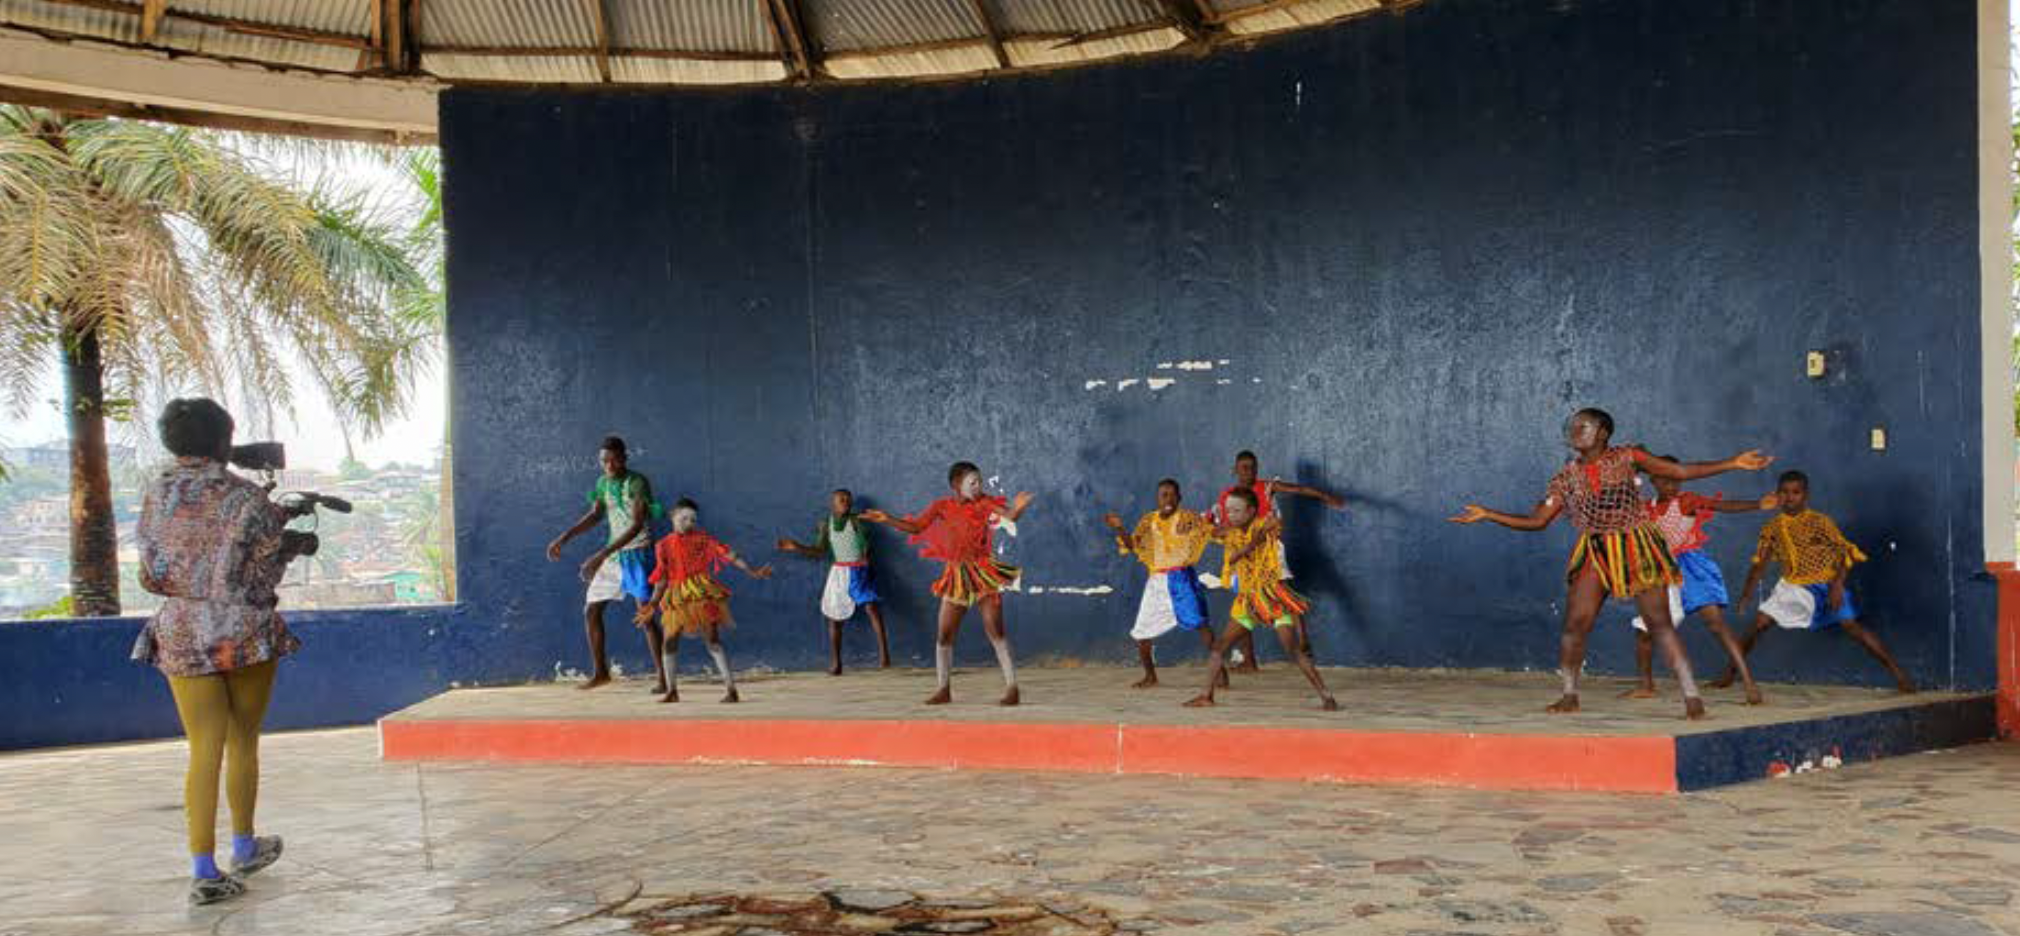 A woman holding a camer and filming as a group of children dance